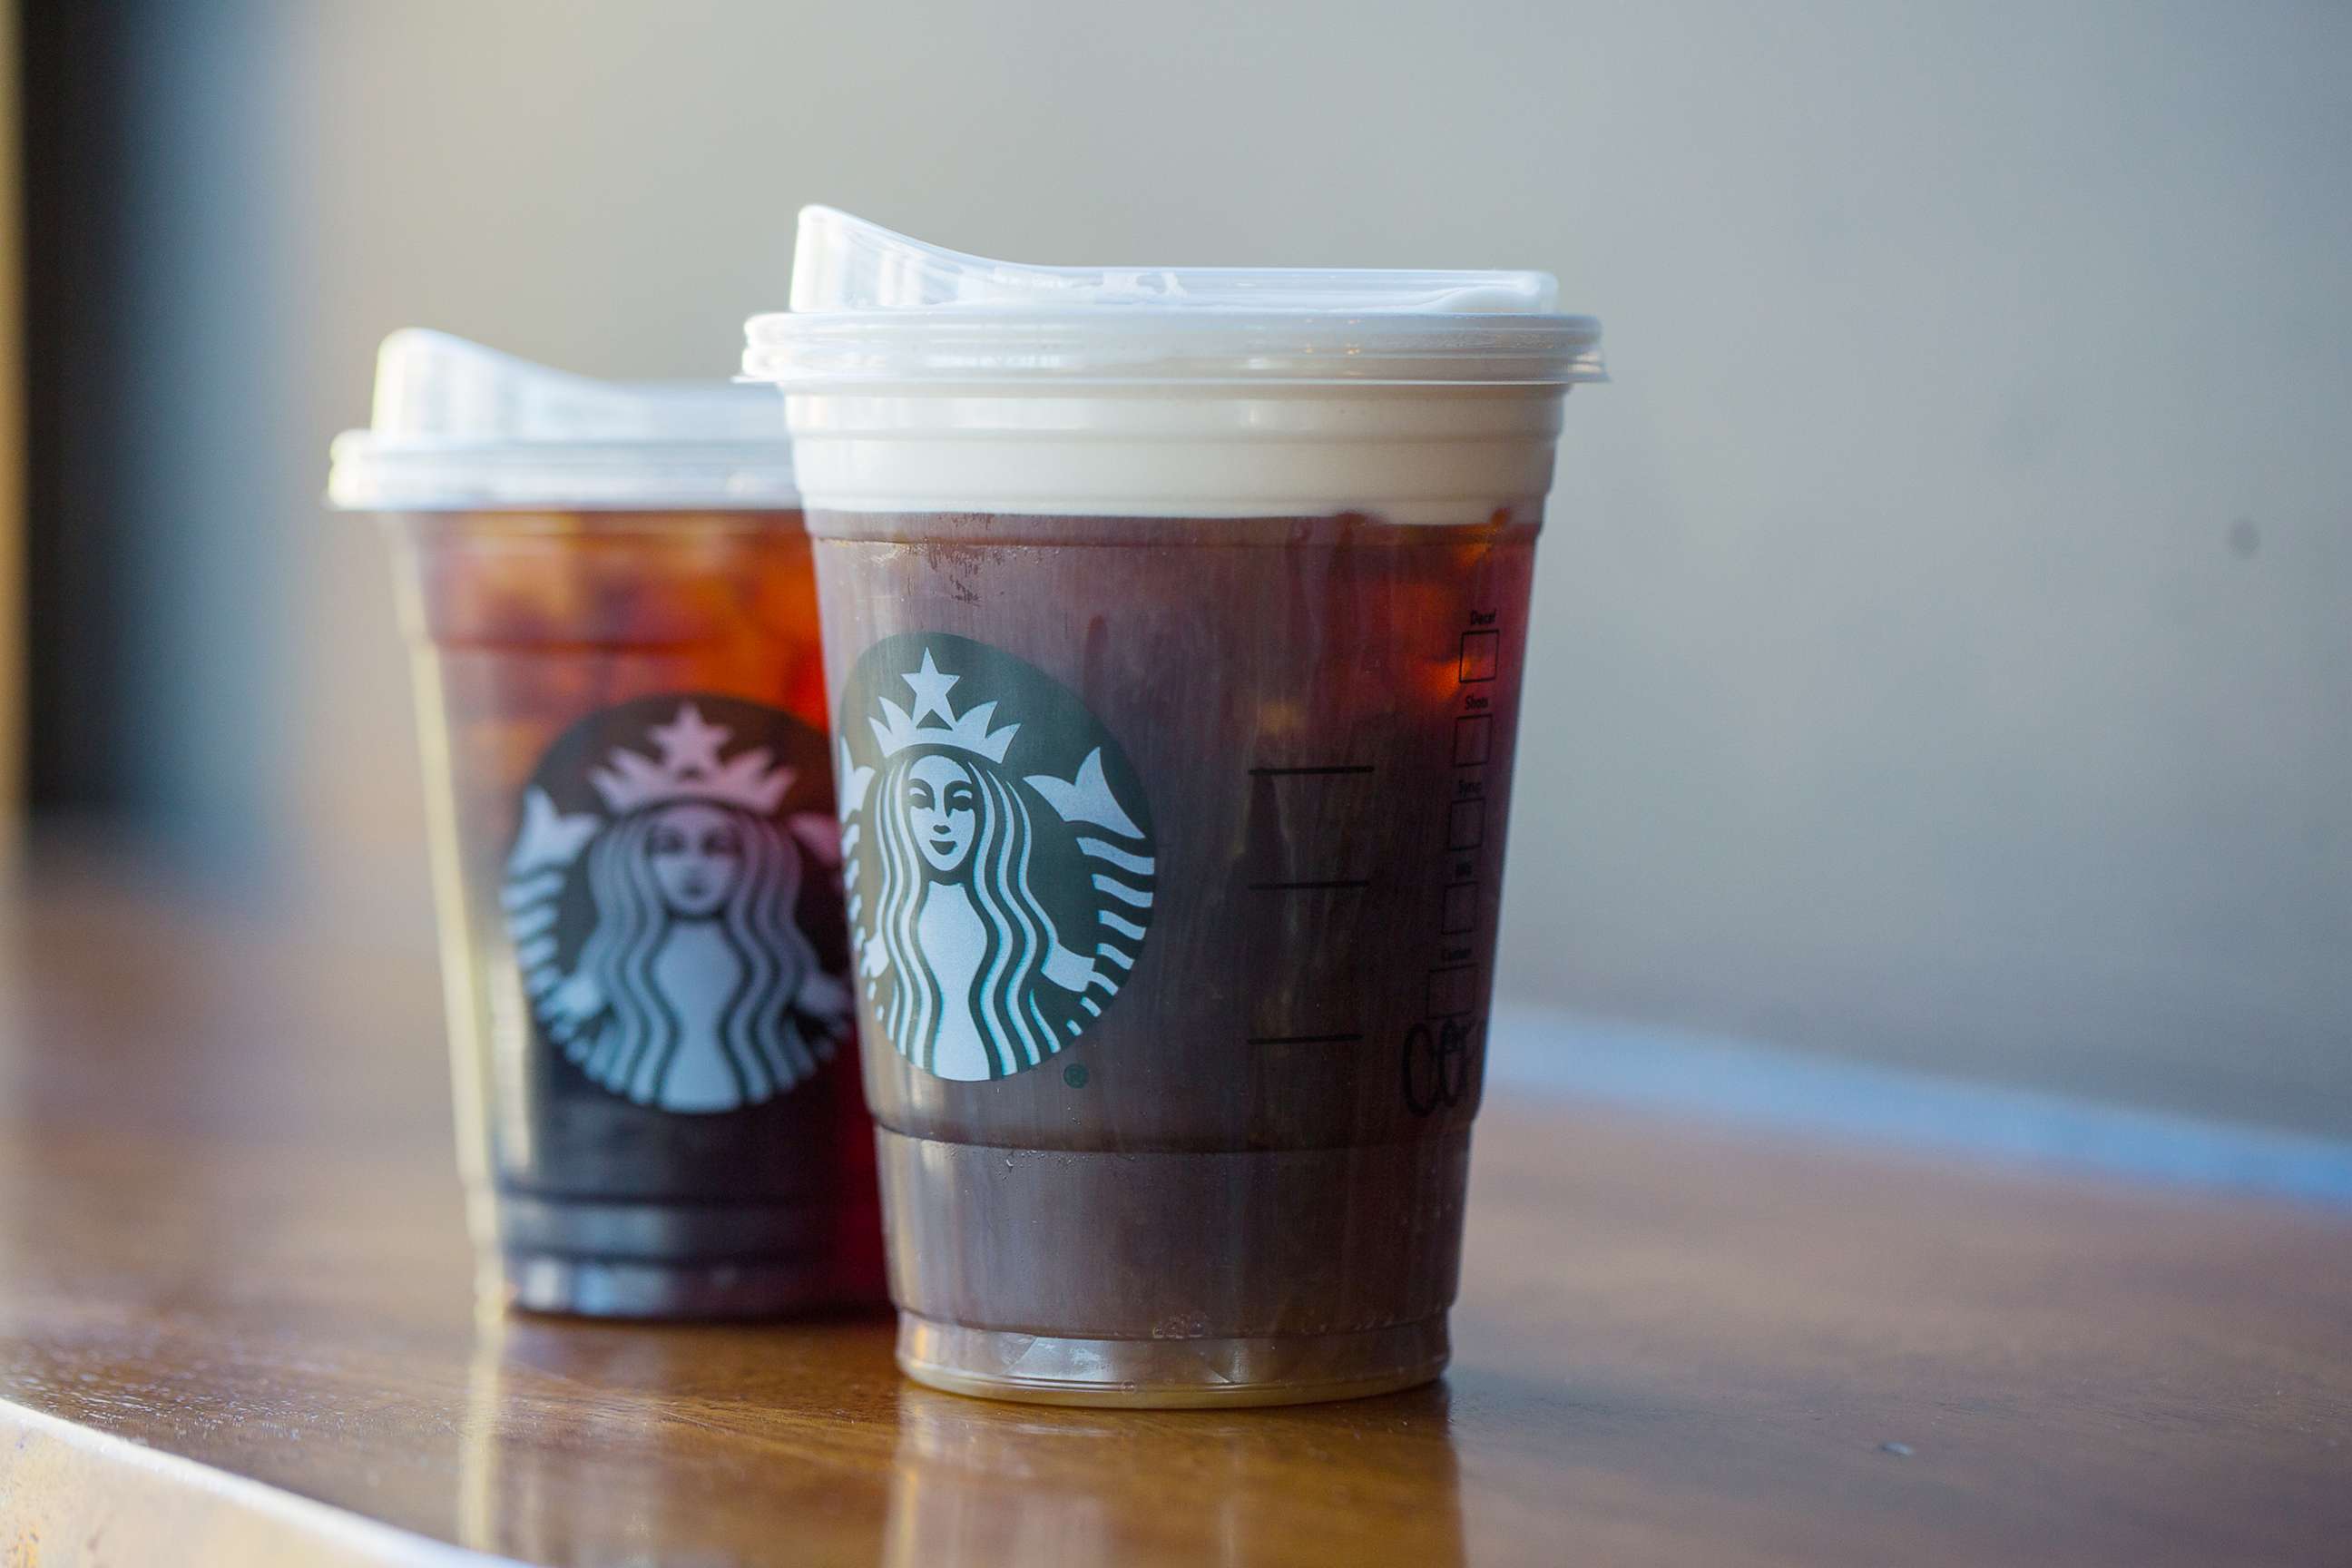 PHOTO: Starbucks will eliminate single-use plastic straws by making a strawless lid or alternative-material straw options available globally.